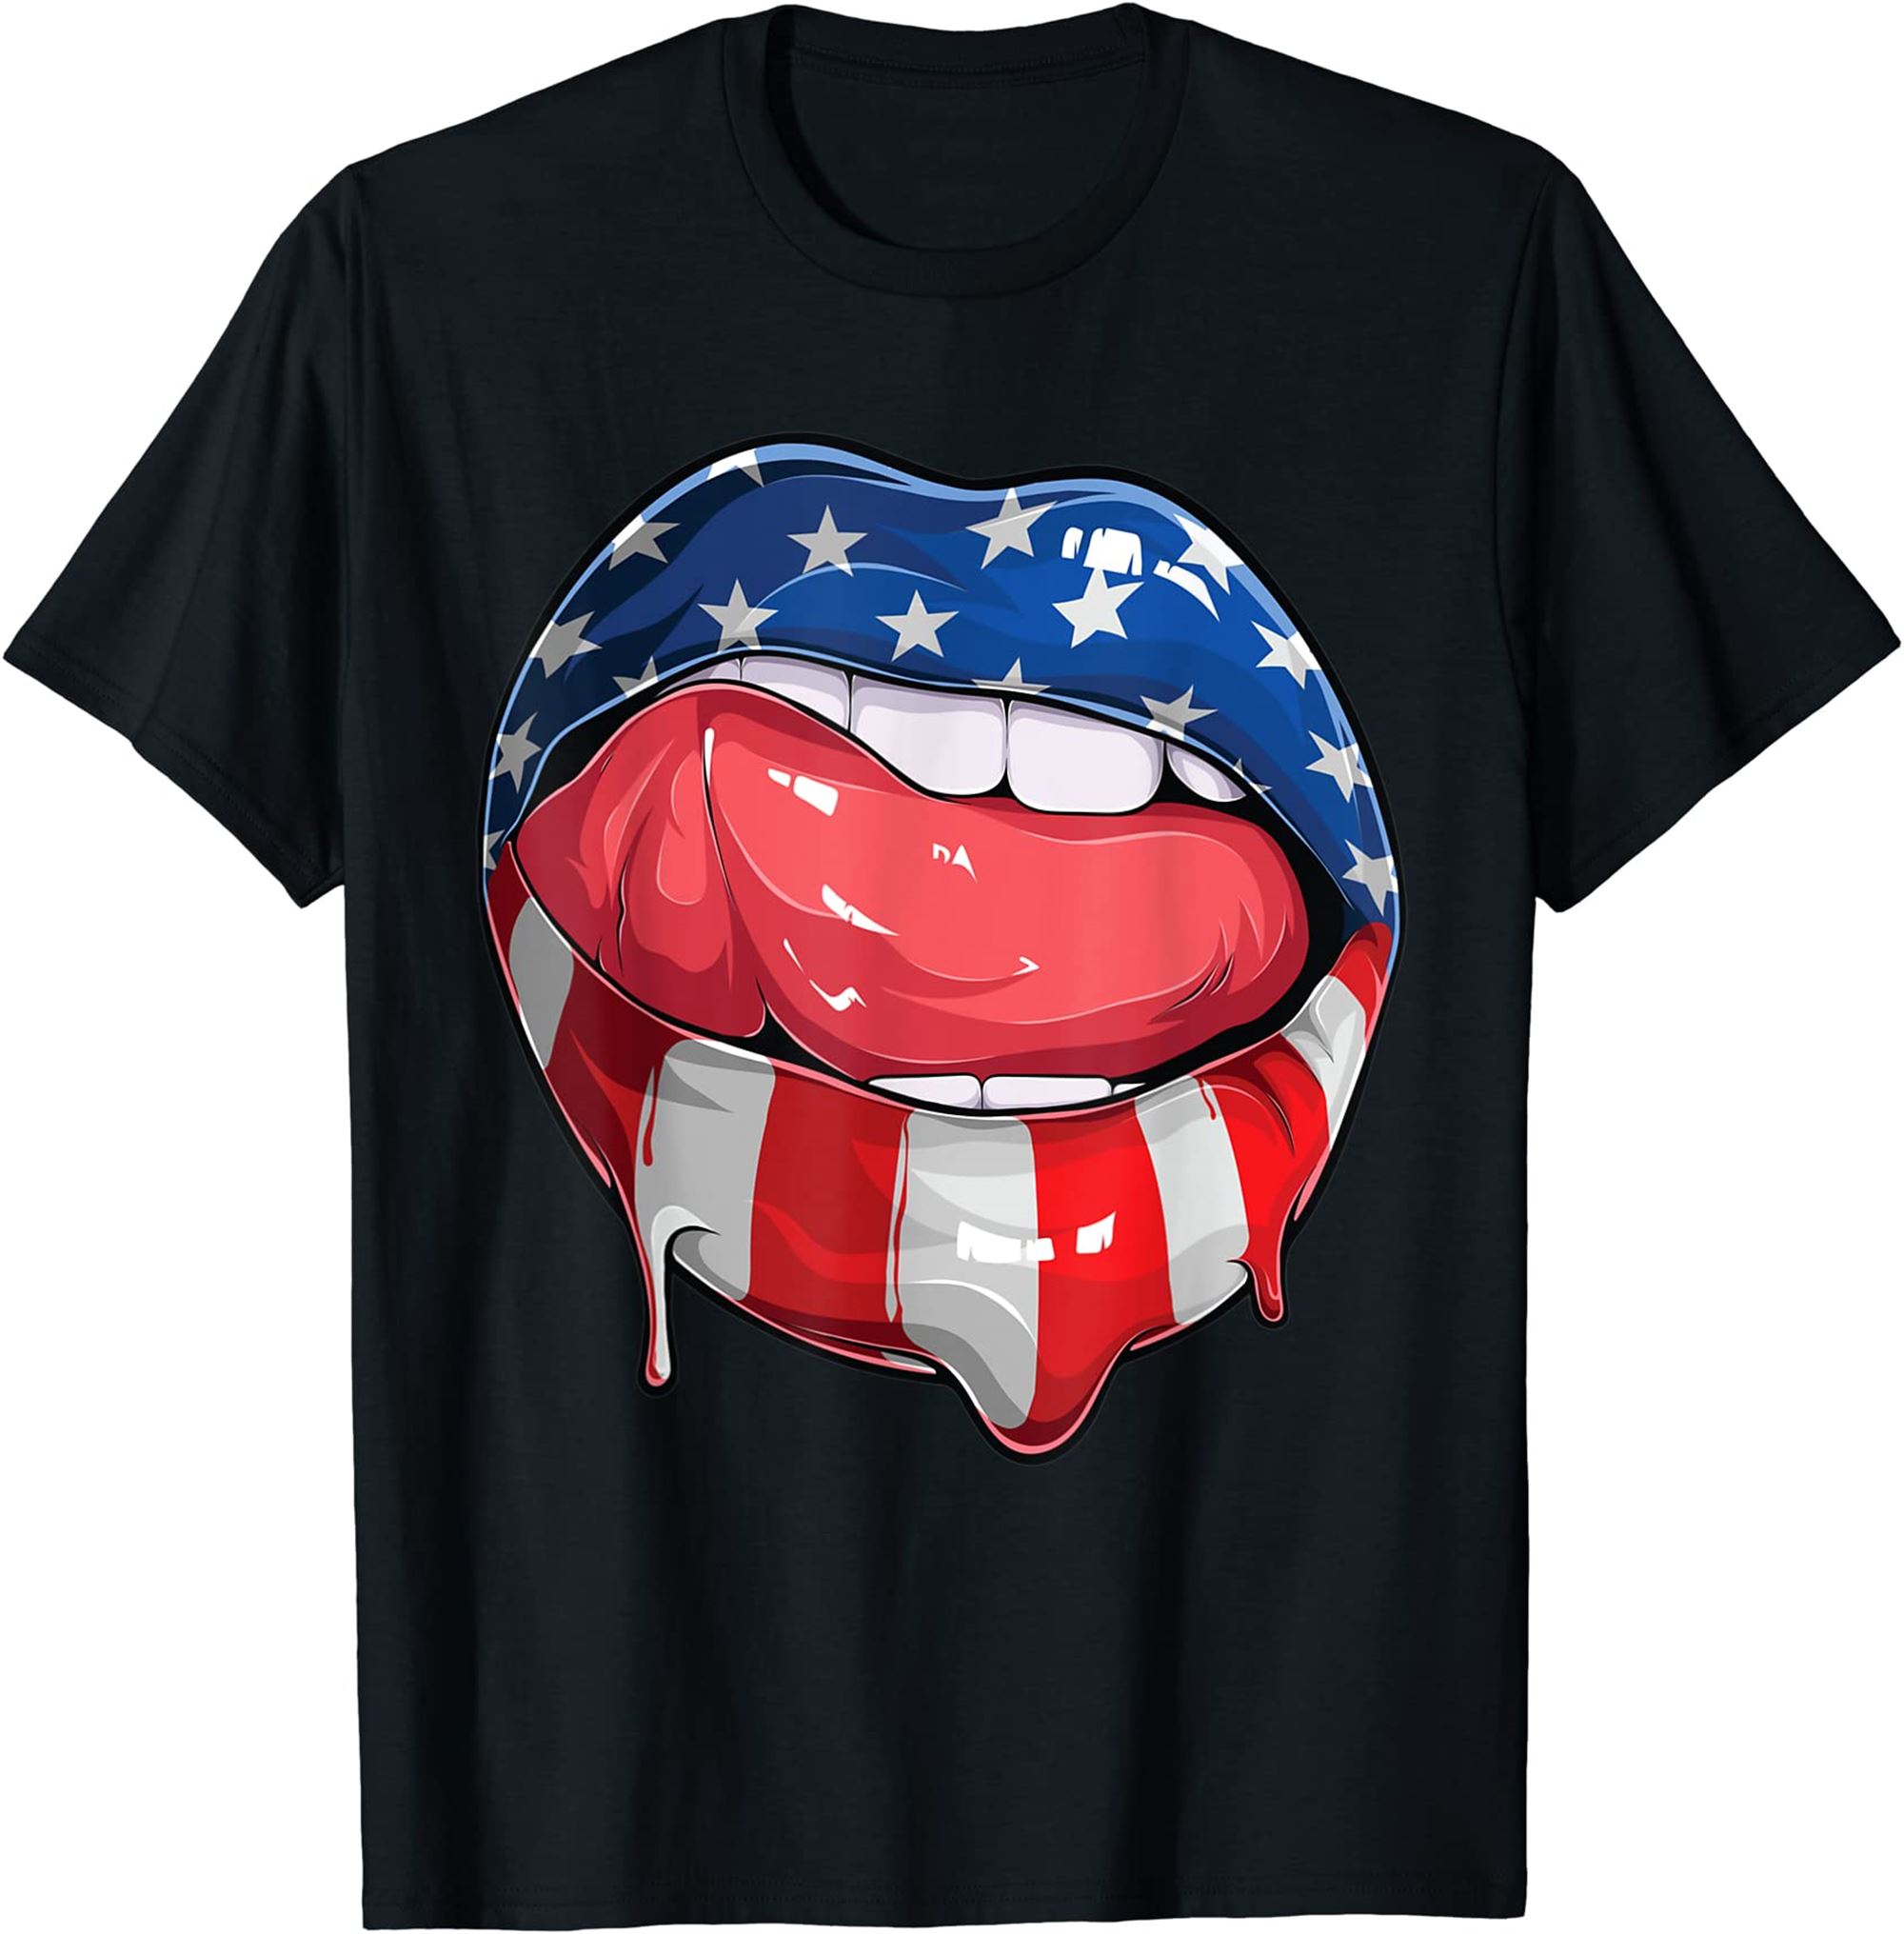 Usa Flag Dripping Lips 4th Of July Patriotic American T-shirt Full Size Up To 5xl